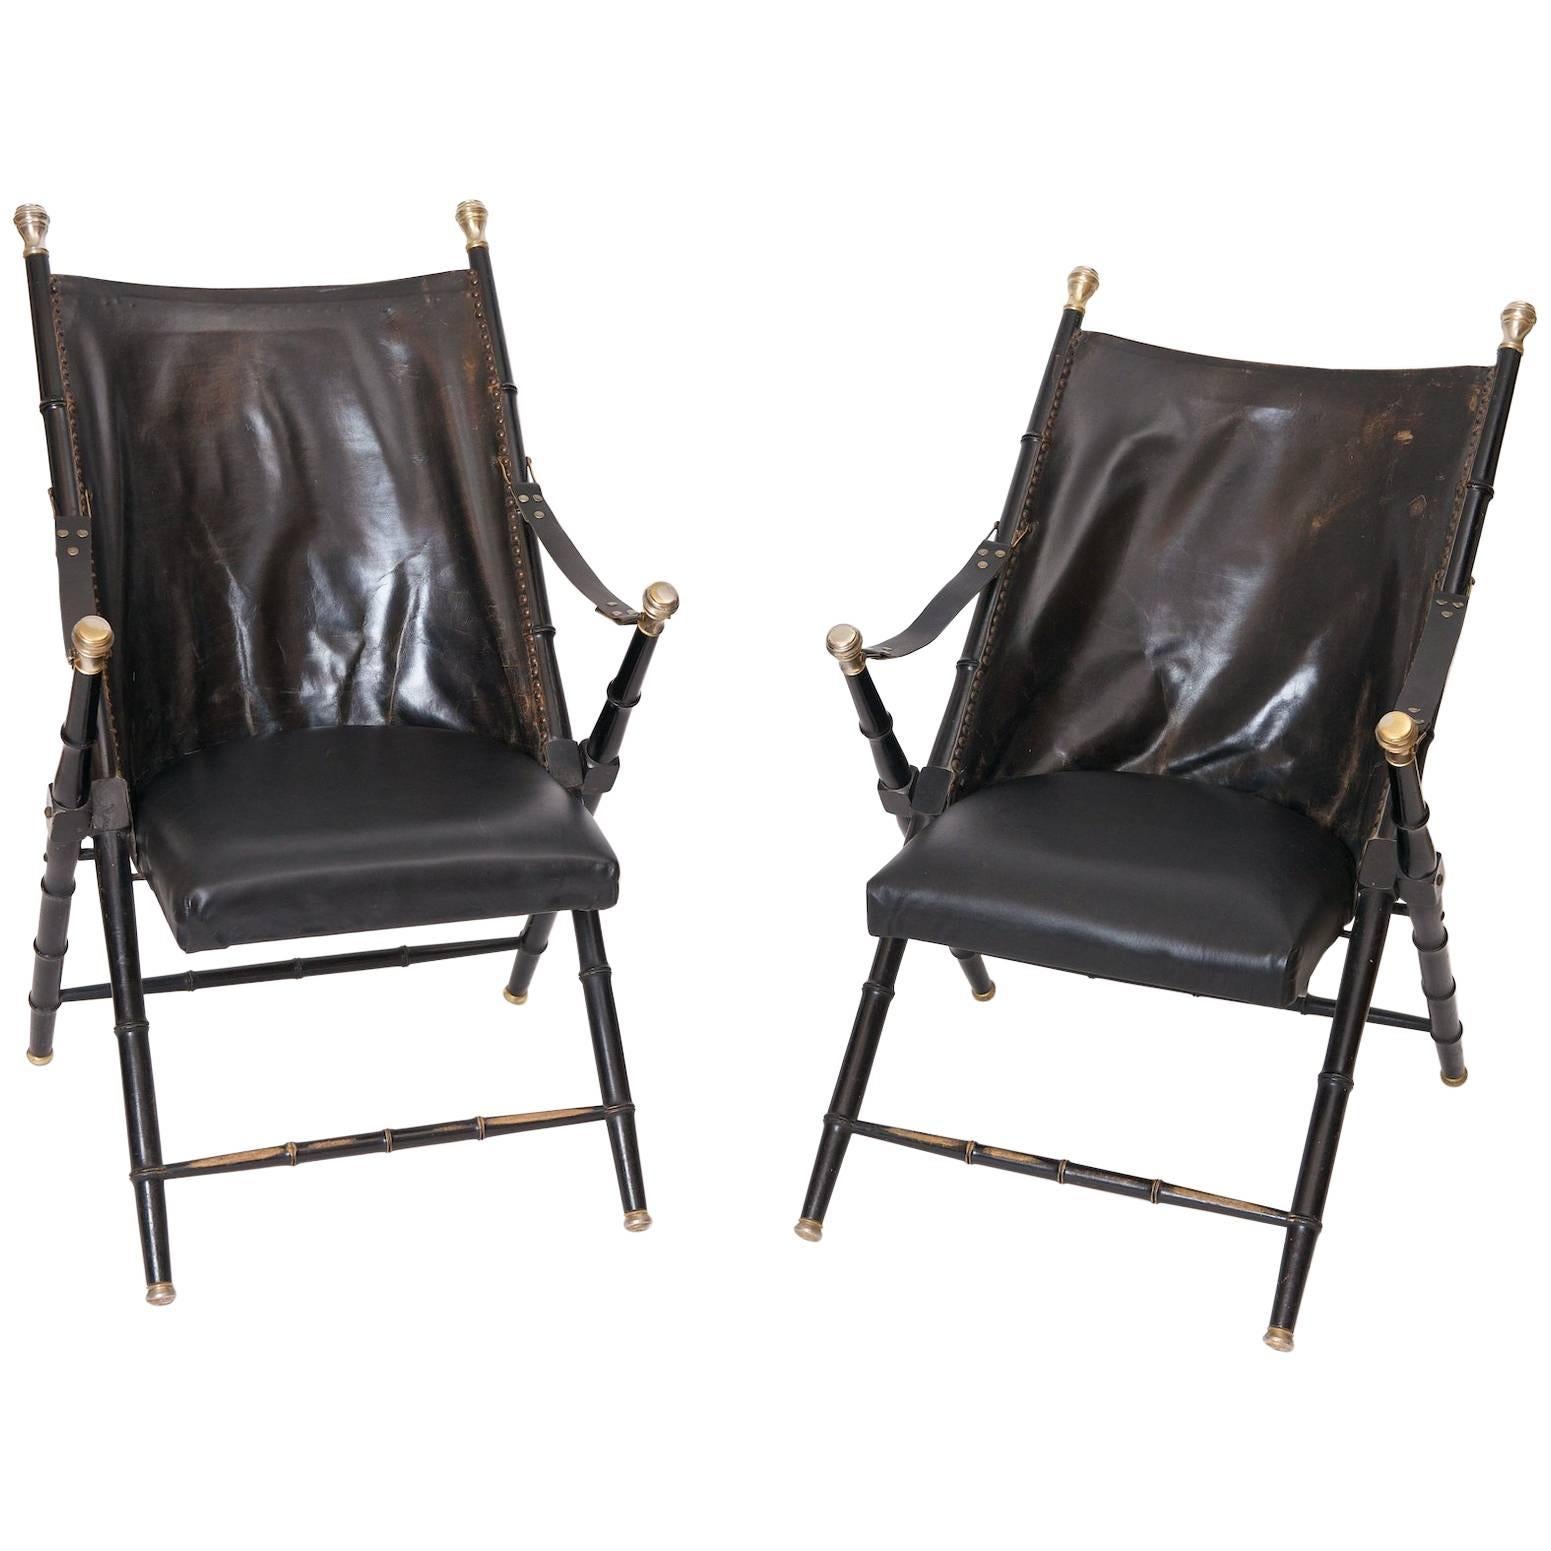 Pair of leather Campaign Chairs